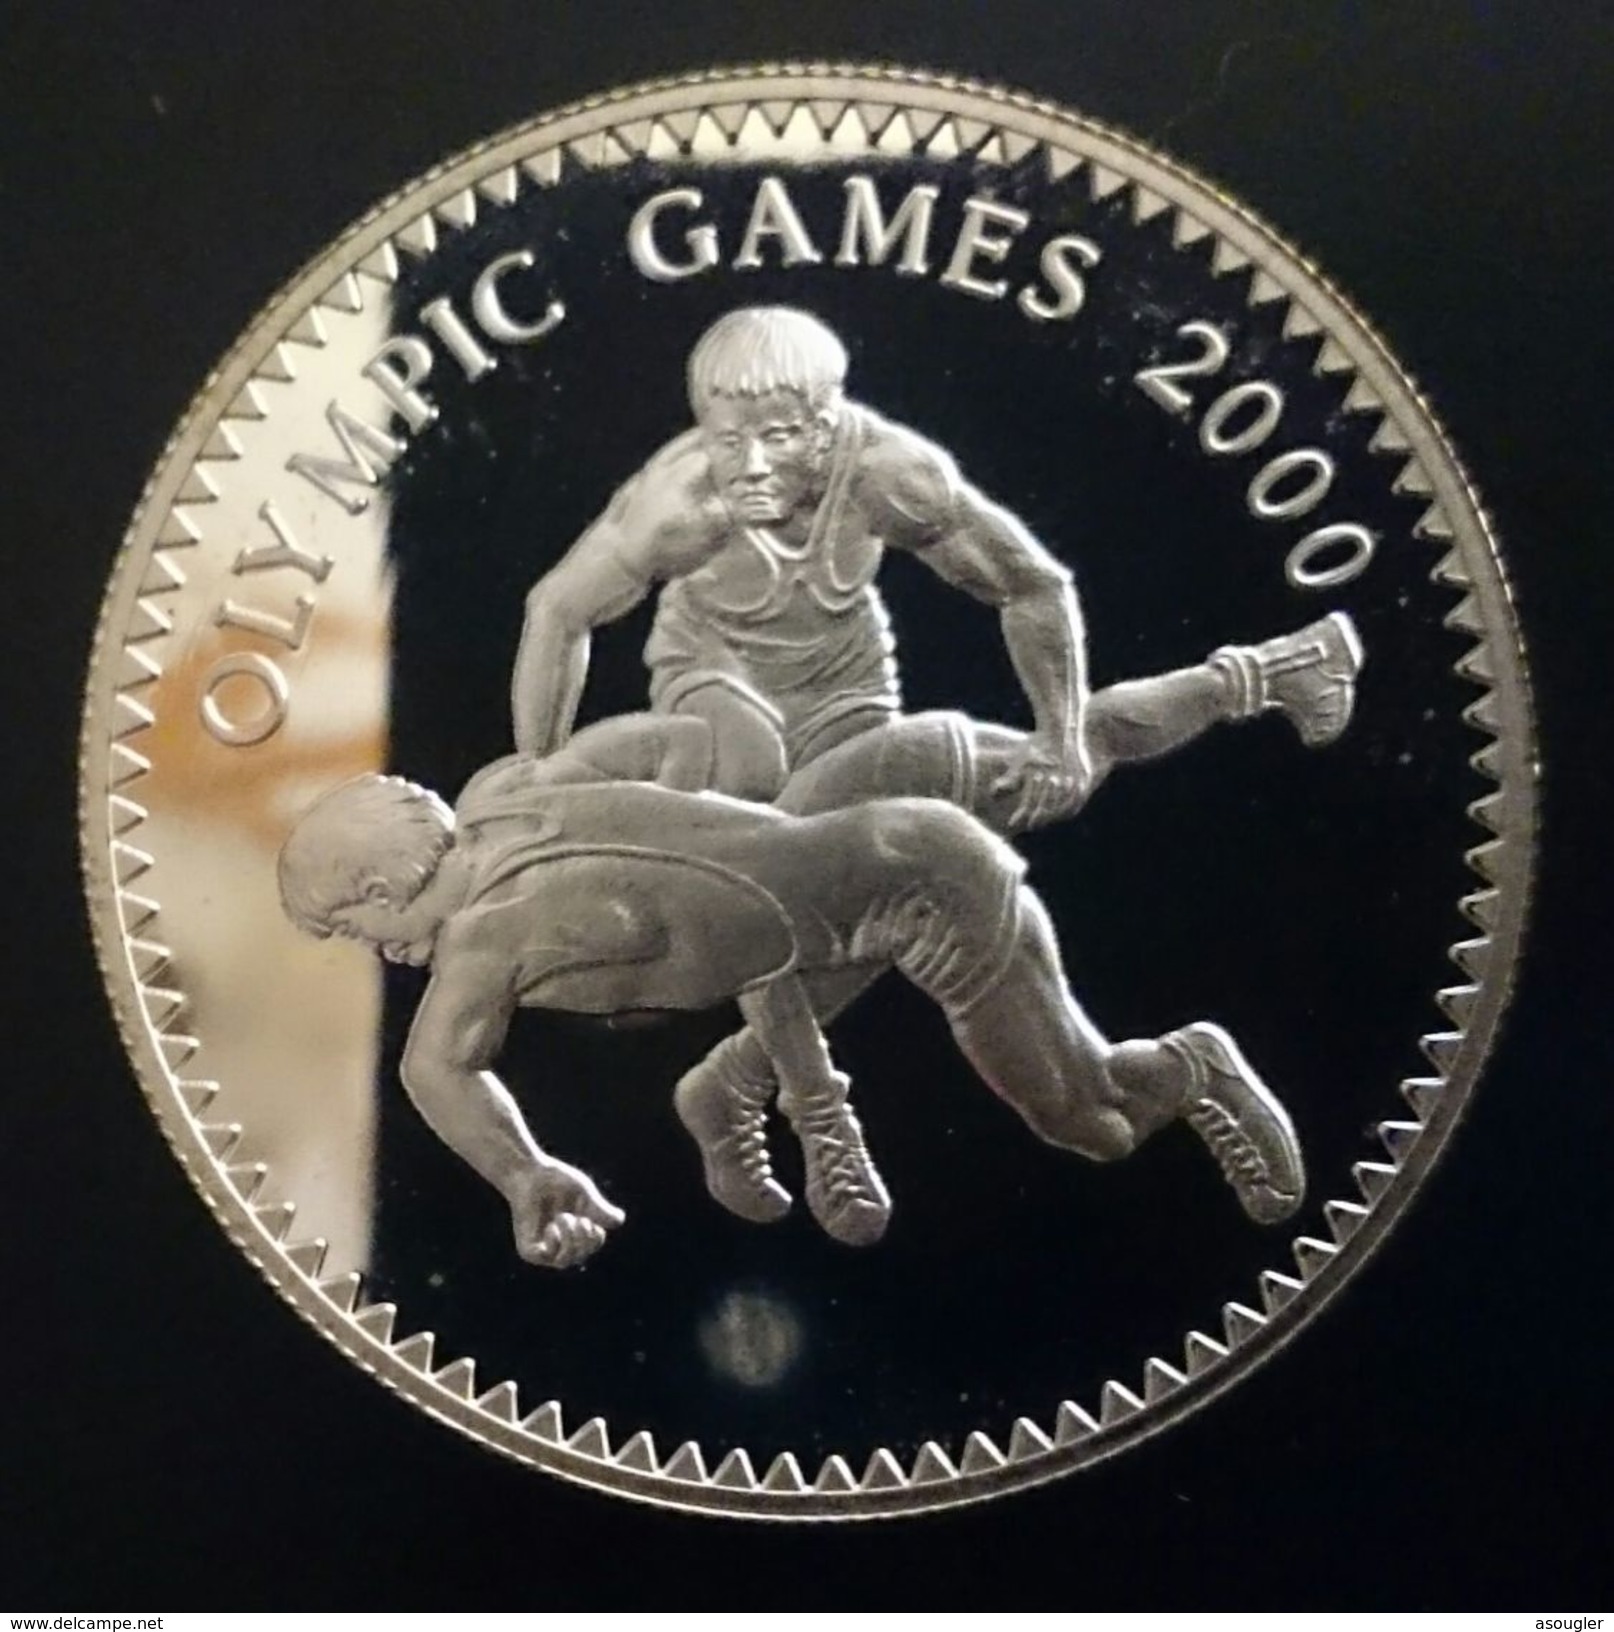 MONGOLIA 500 TUGRIK ND 1998 SILVER PROOF "2000 Olympics Games" Free Shipping Via Registered Air Mail - Mongolië